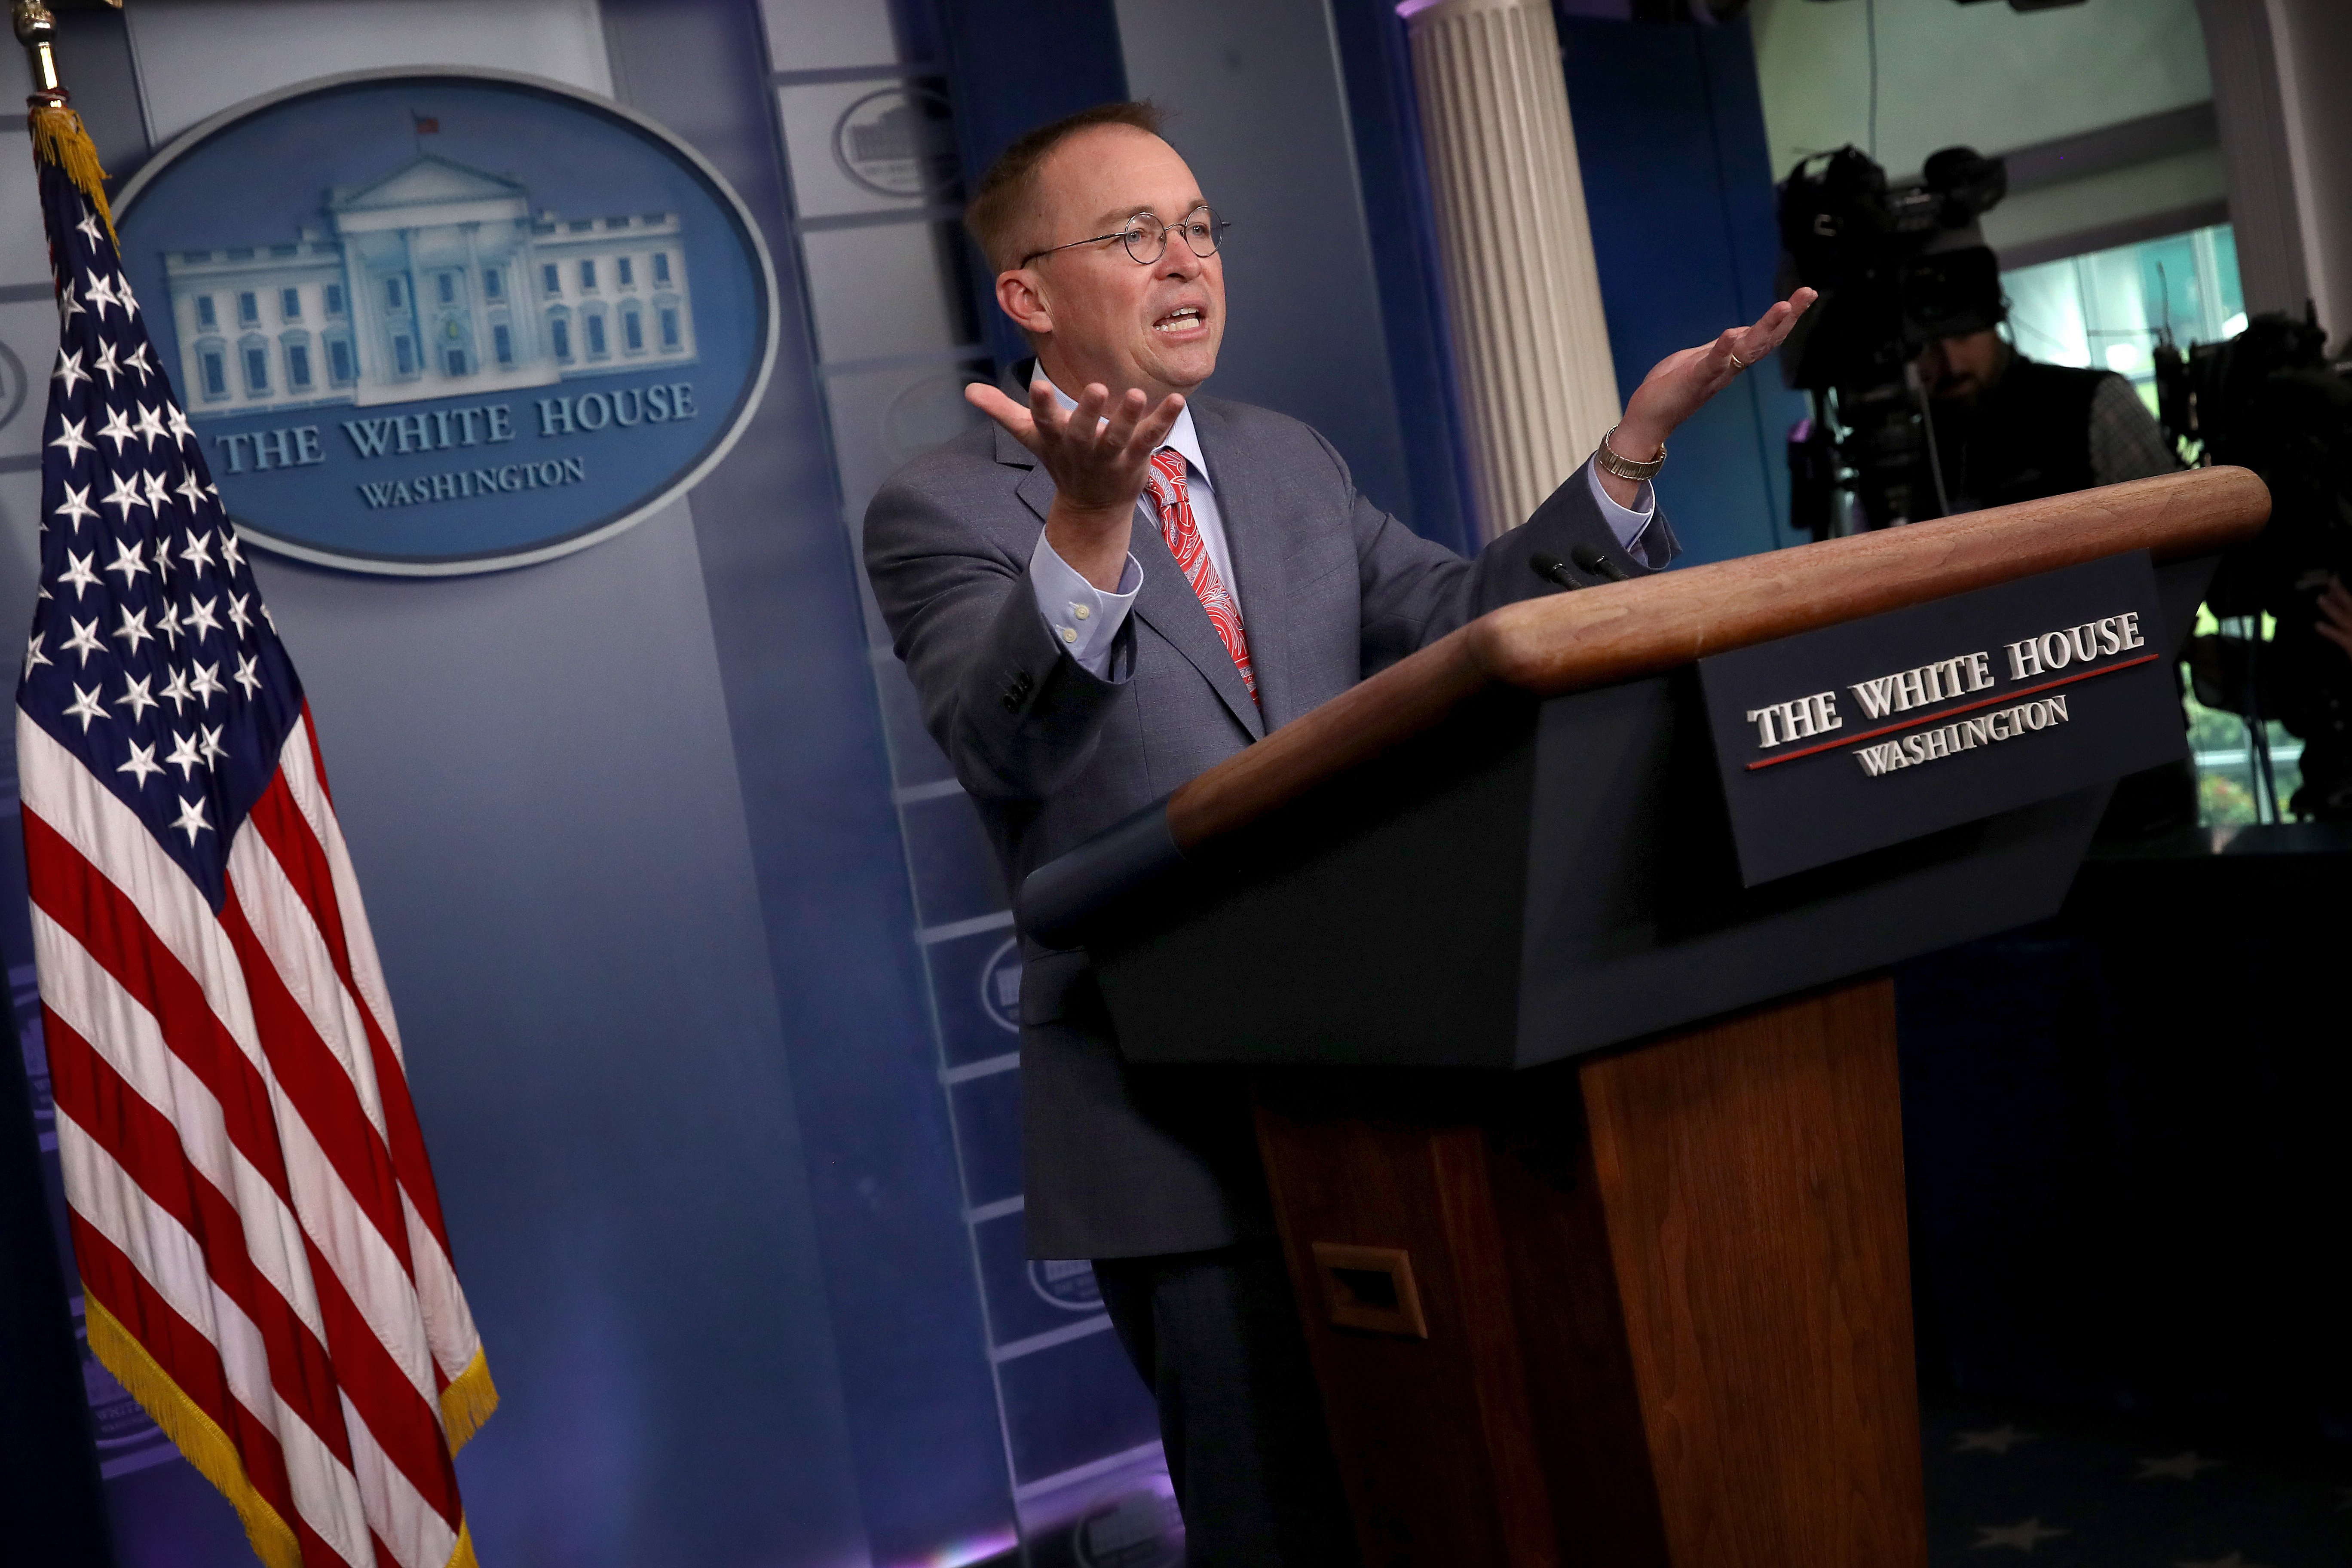 WASHINGTON, DC - OCTOBER 17: Acting White House Chief of Staff Mick Mulvaney answers questions during a briefing at the White House October 17, 2019 in Washington, DC. Mulvaney answered a range of questions relating to the issues surrounding the impeachment inquiry of U.S. President Donald Trump, and other issues during the briefing. (Photo by Win McNamee/Getty Images)